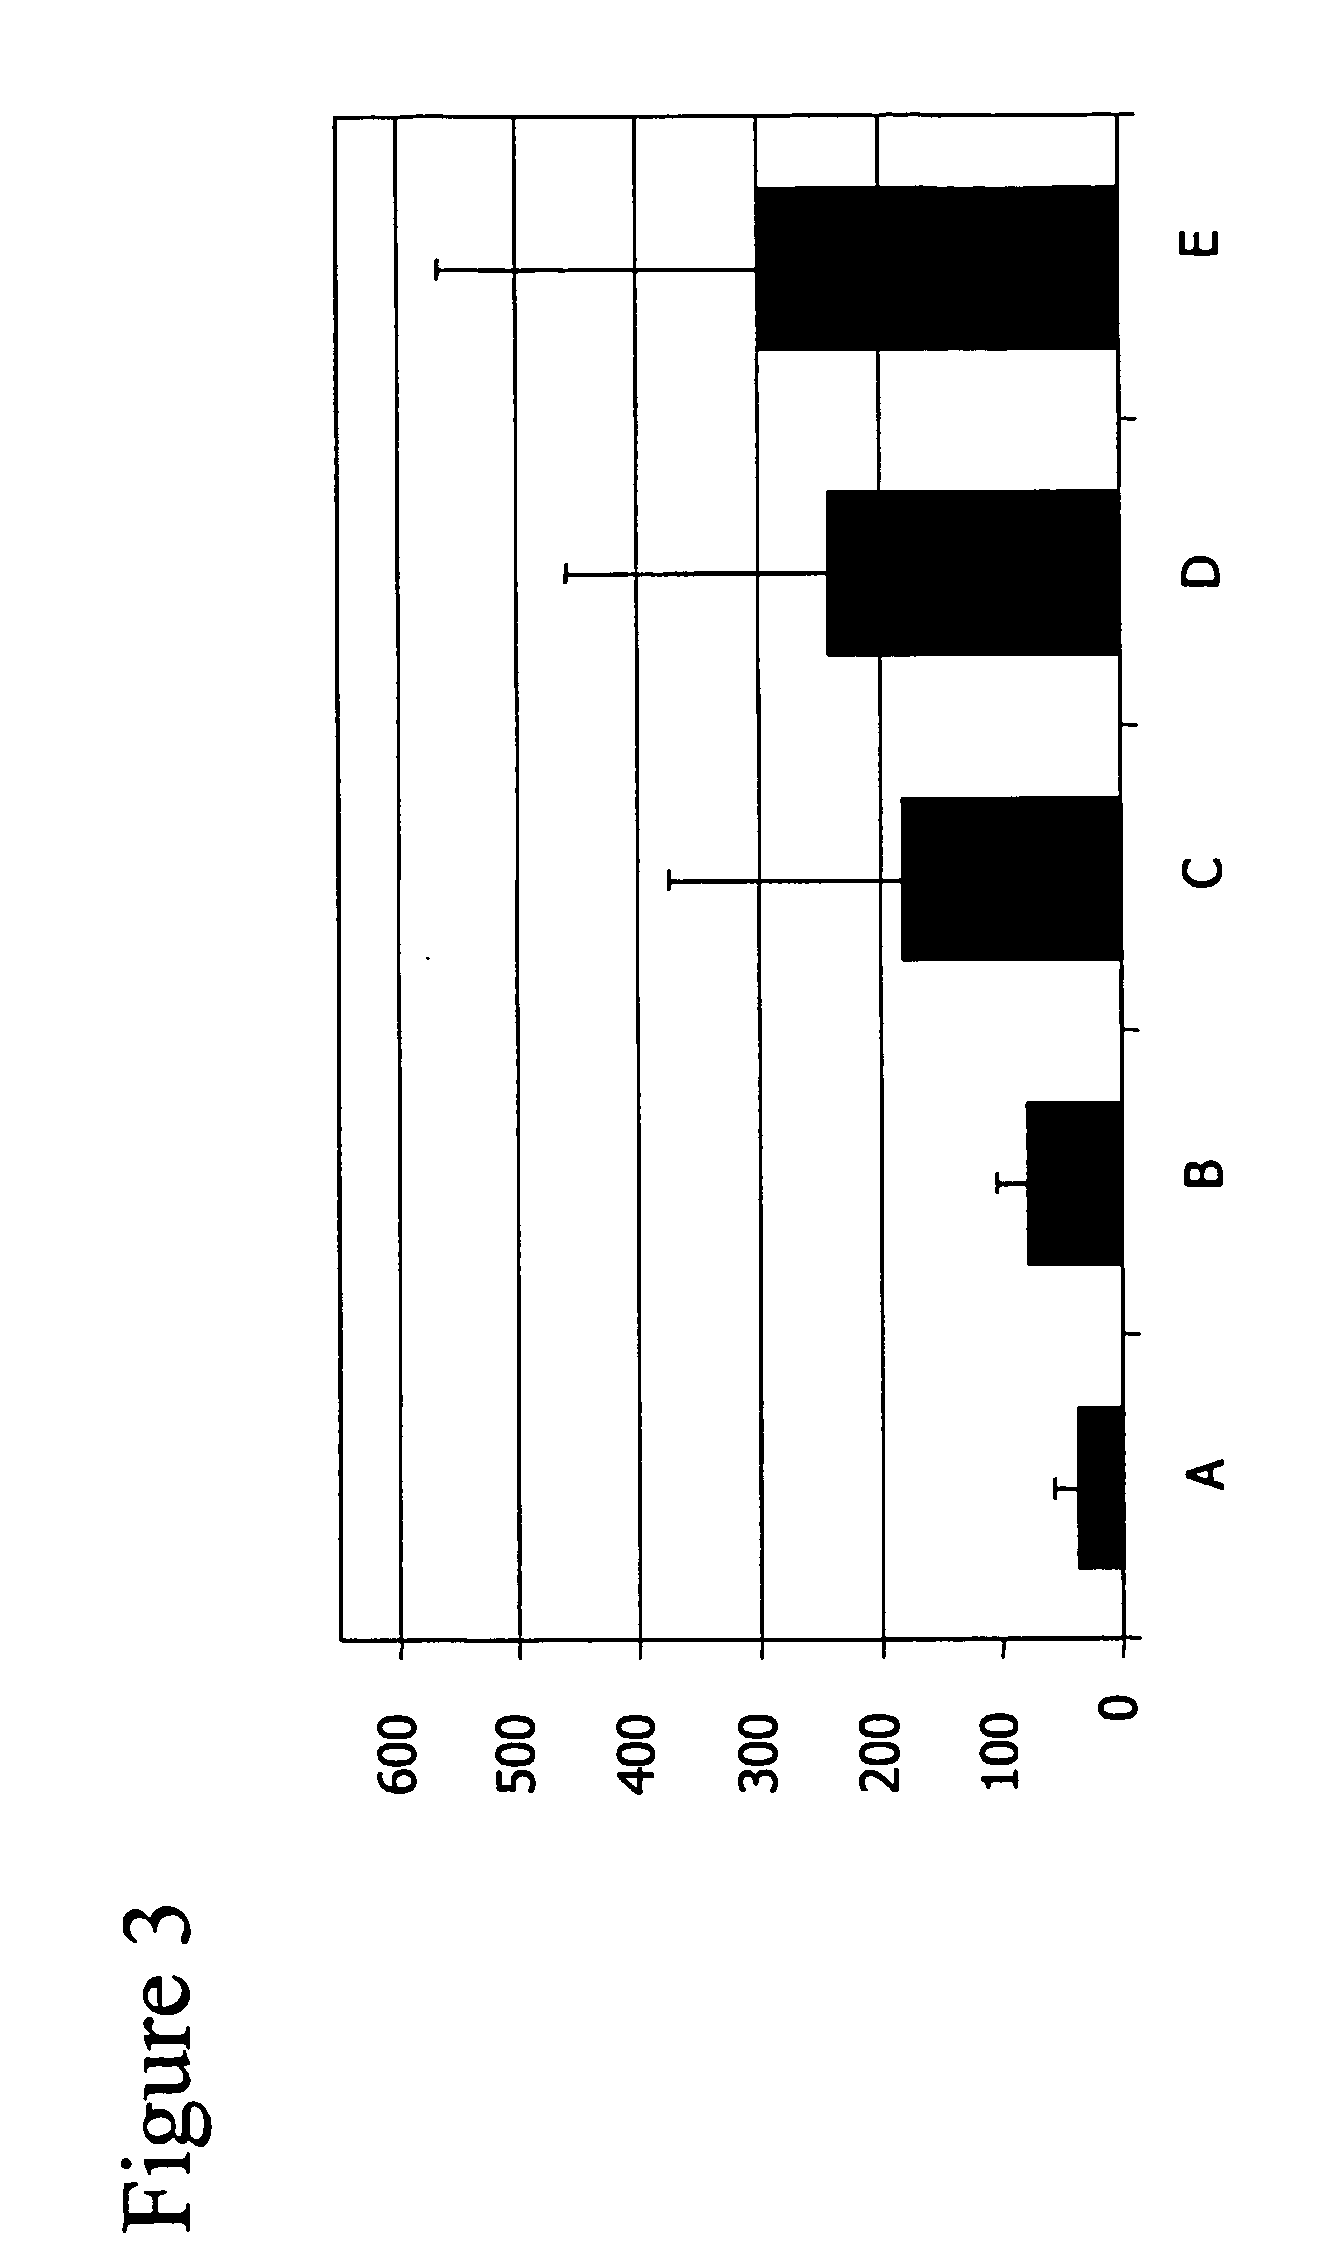 Method and device for determination of tissue specificity of free floating dna in bodily fluids